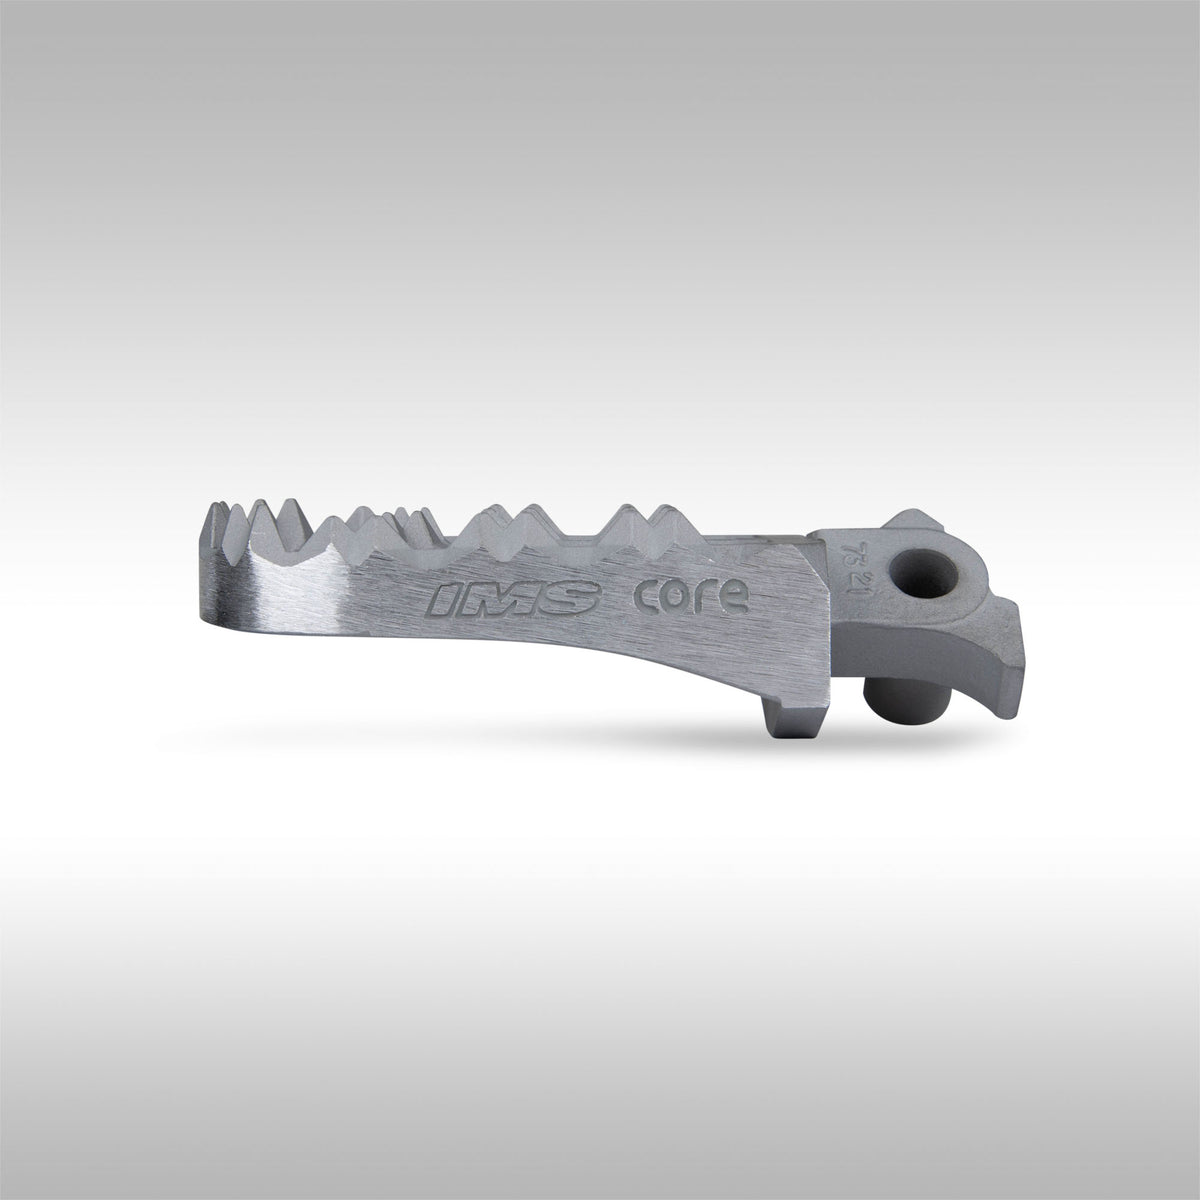 IMS PRODUCTS - CORE ENDURO FOOT PEGS - TENERE 700